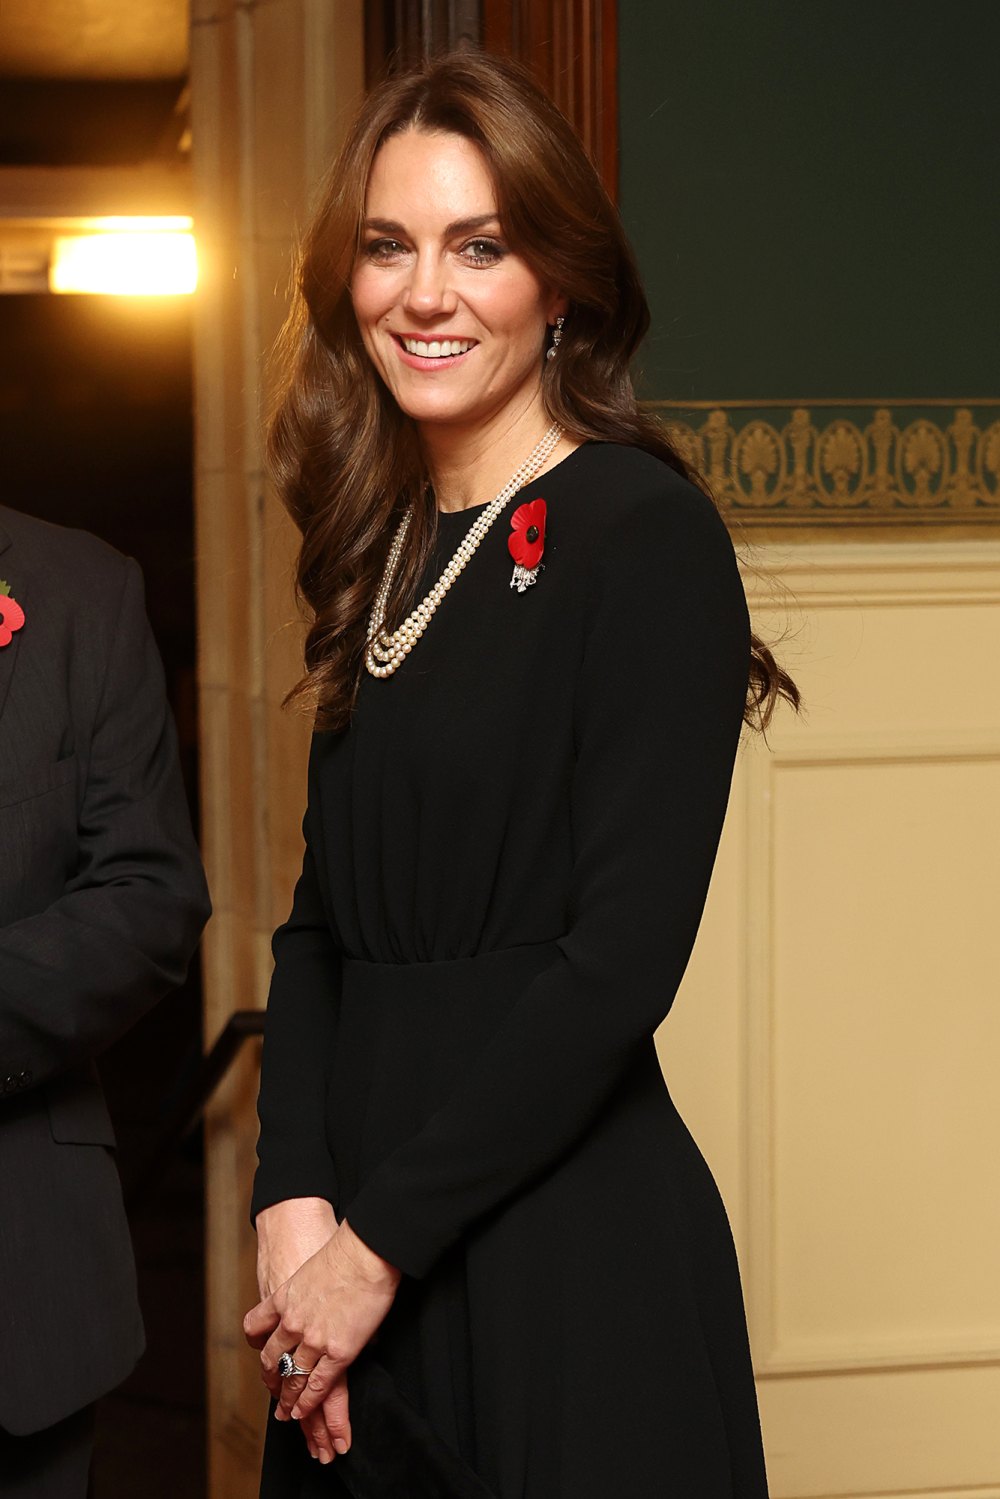 Princess Kate Subtly Honors Queen Elizabeth II With Jewelry on Remembrance Day